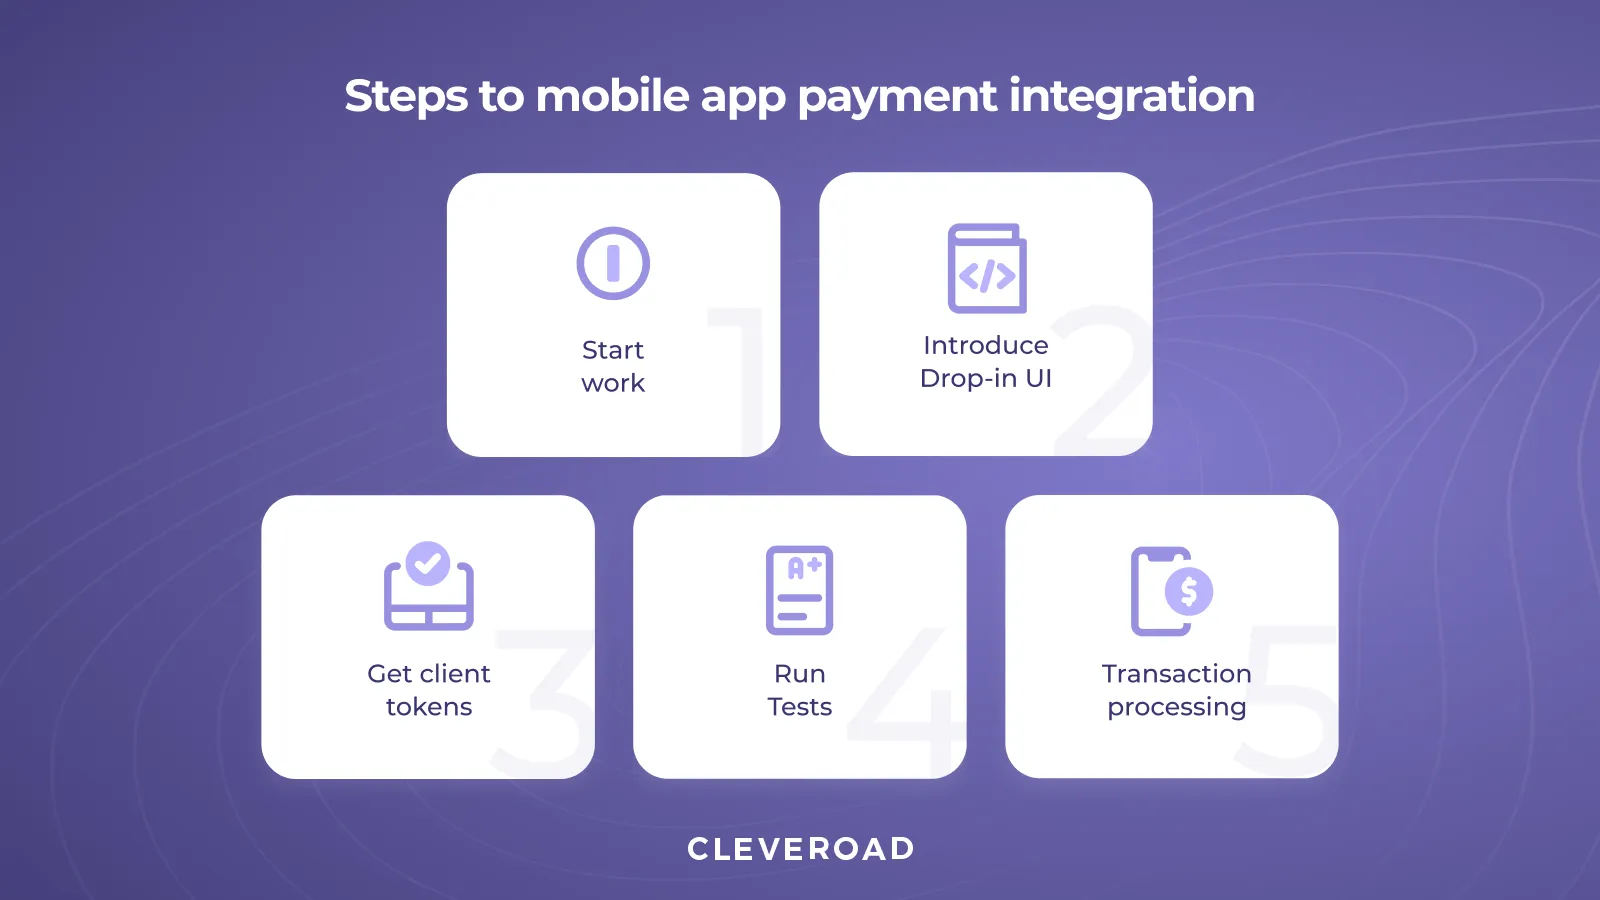 Steps to mobile app payment integration